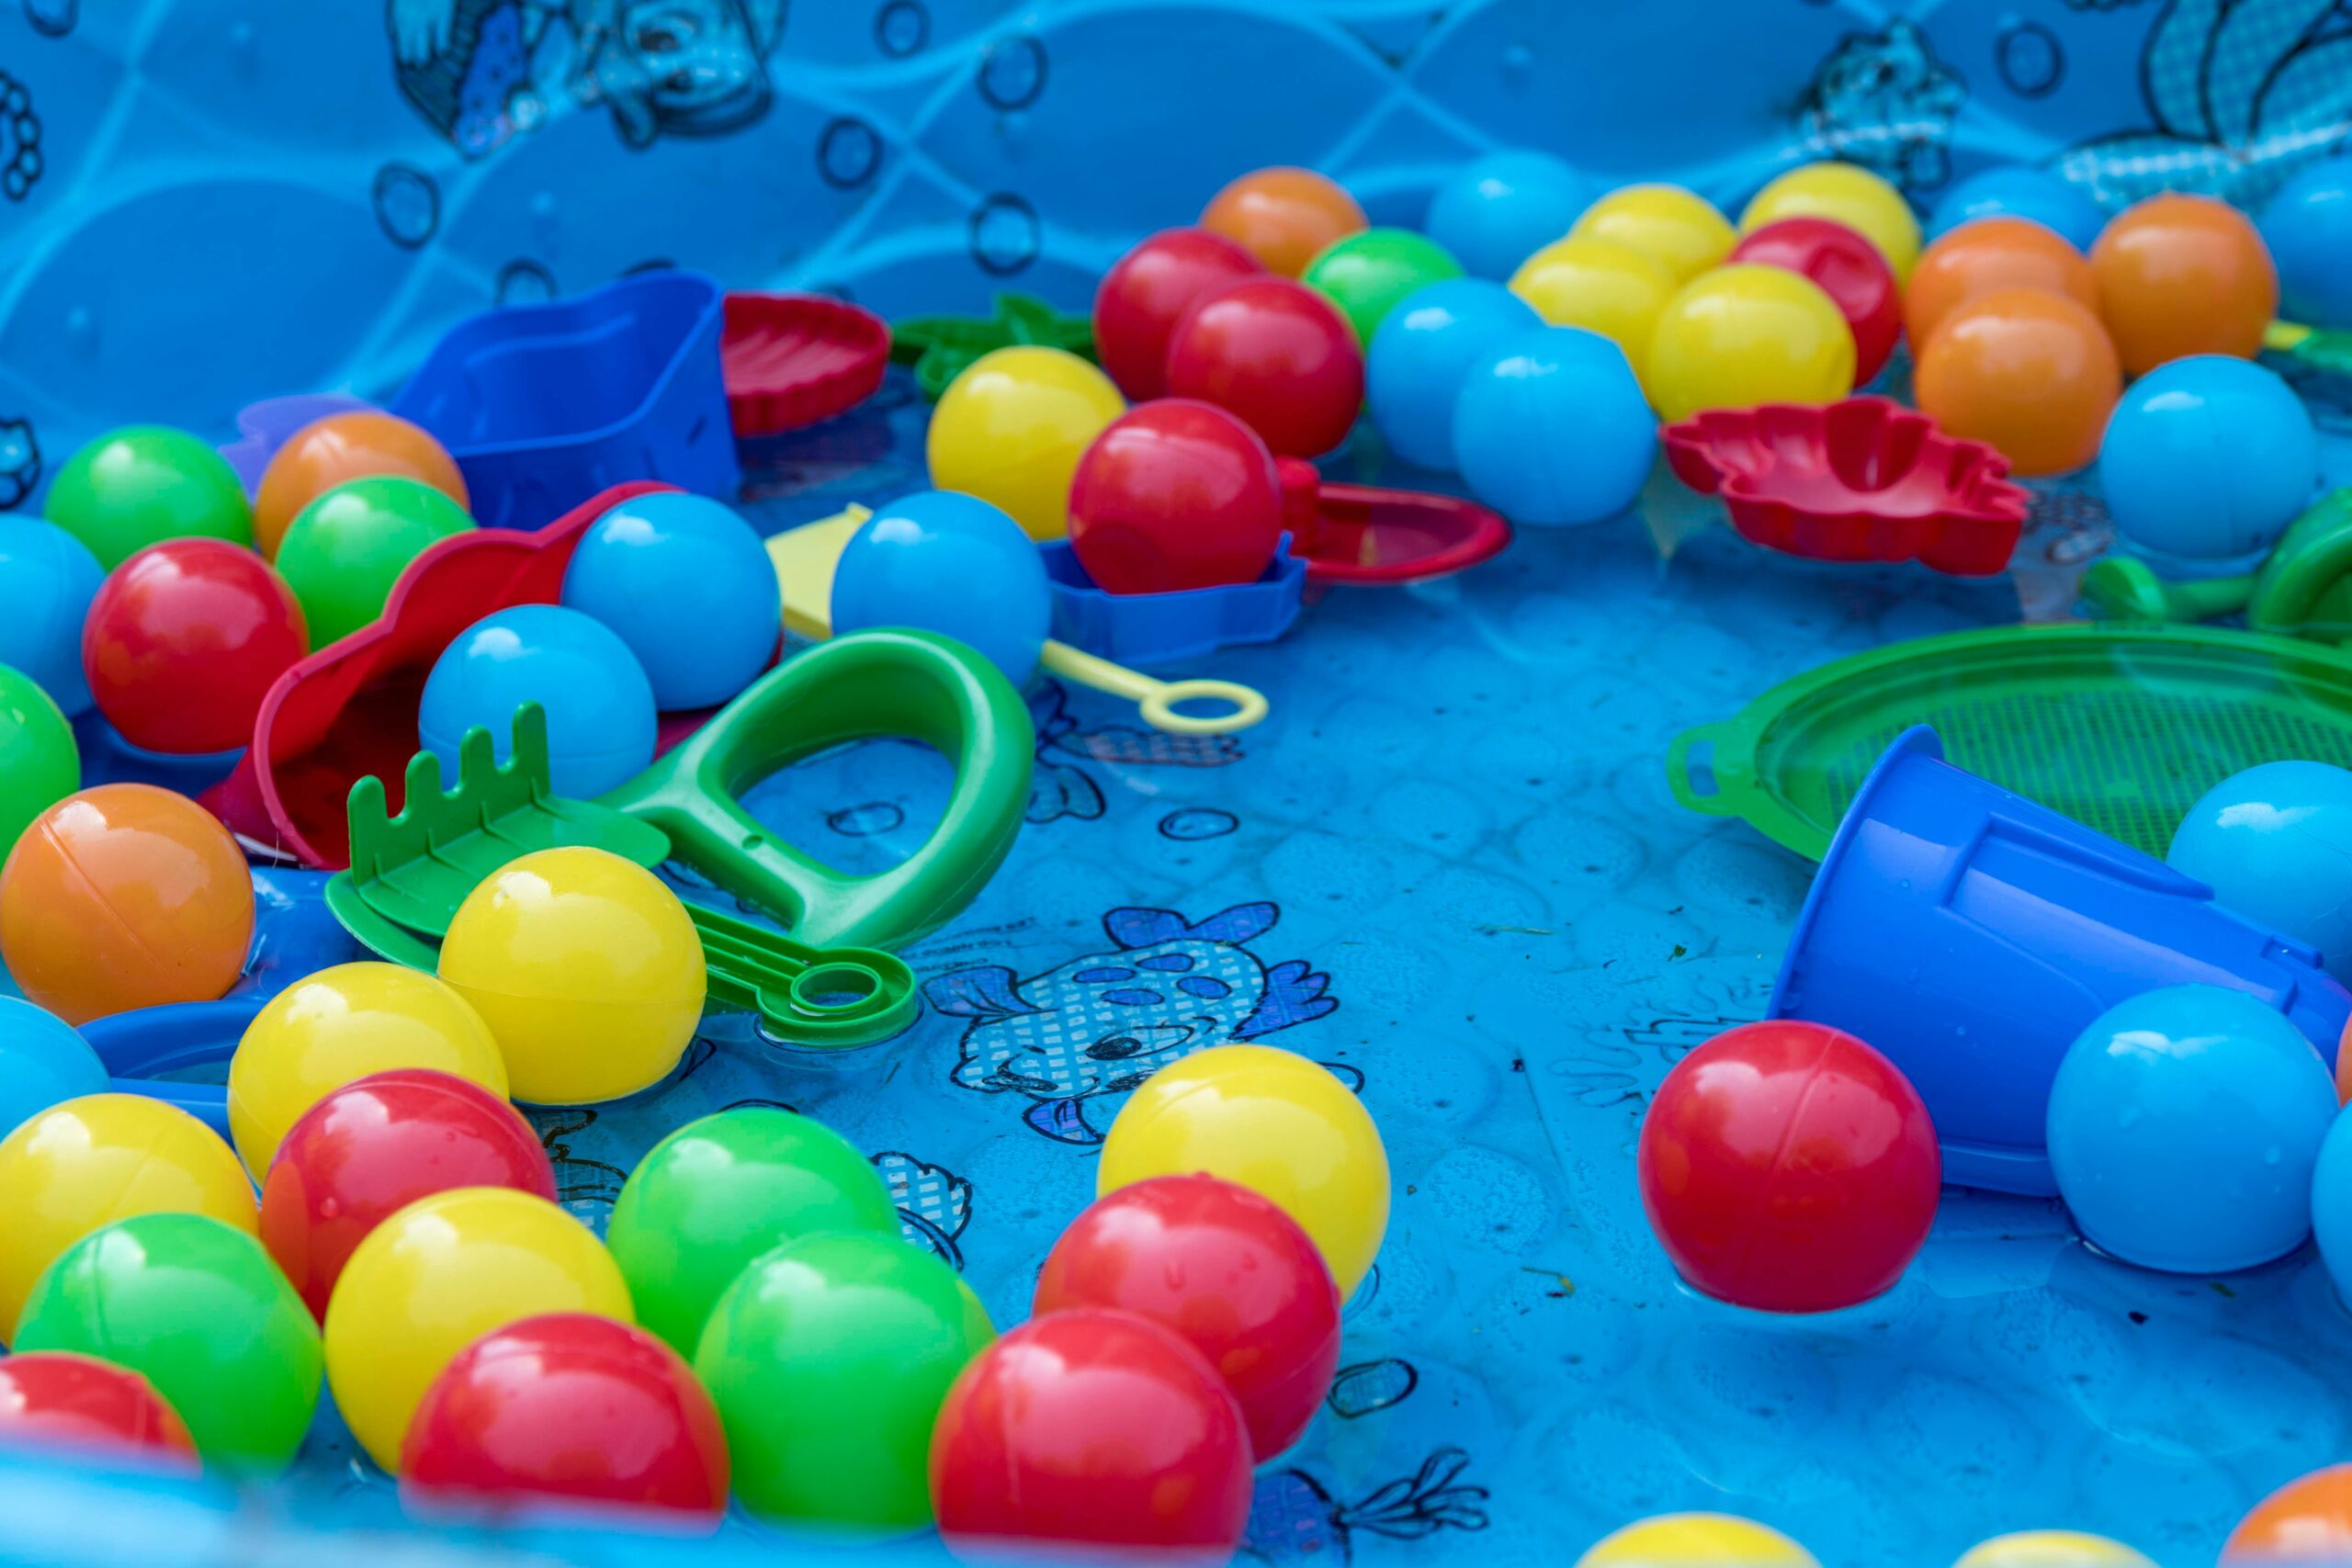 Ball-pit balls and toy spades lie in an paddling-pool with nobody playing in it, representing the perk-cession. Image by Christine Tutenjian on Unsplash. Thanks Christine.